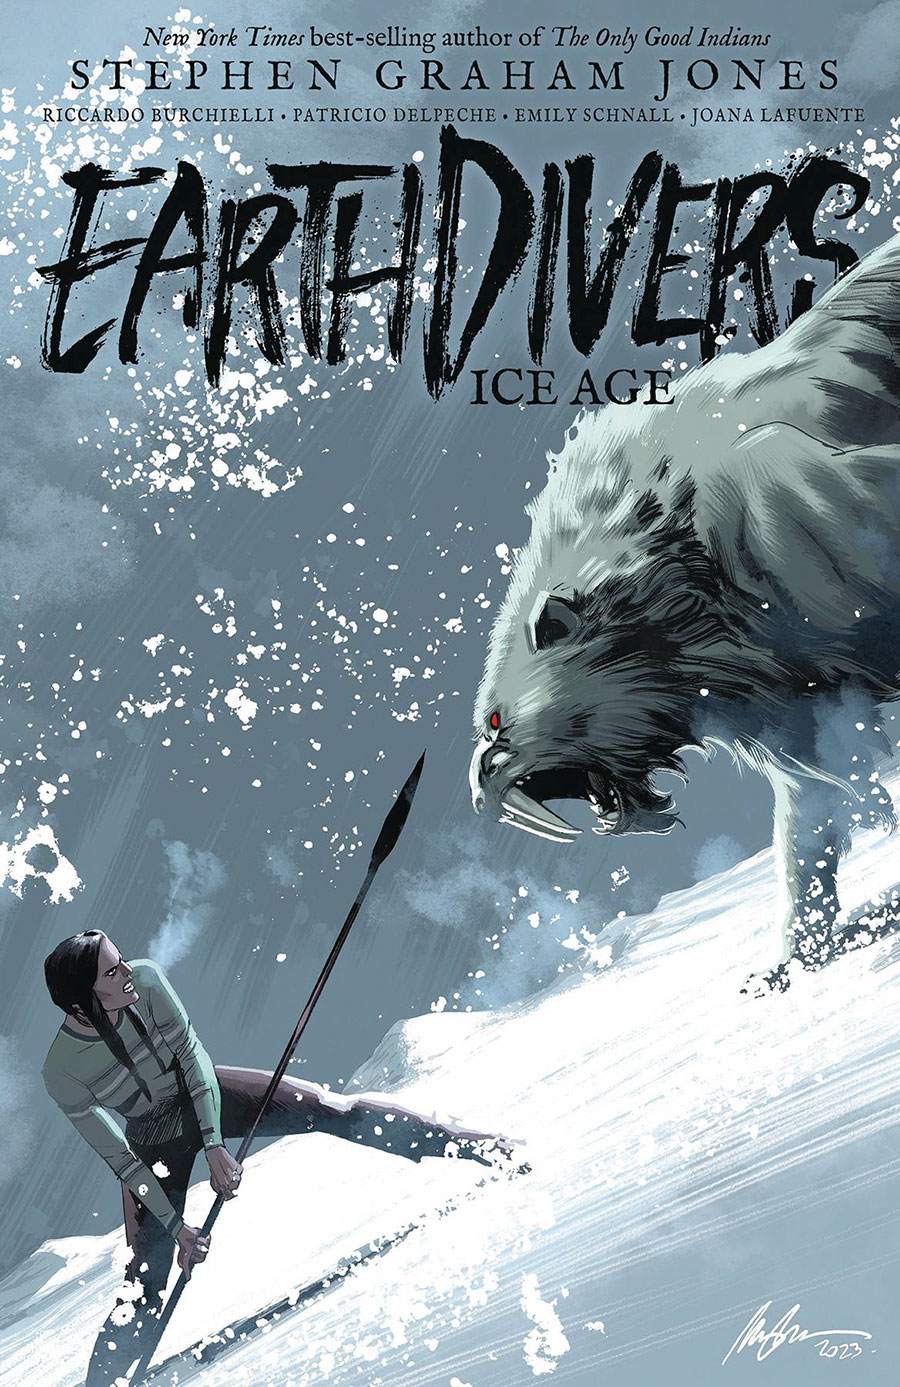 Earthdivers Vol 2 Ice Age TP